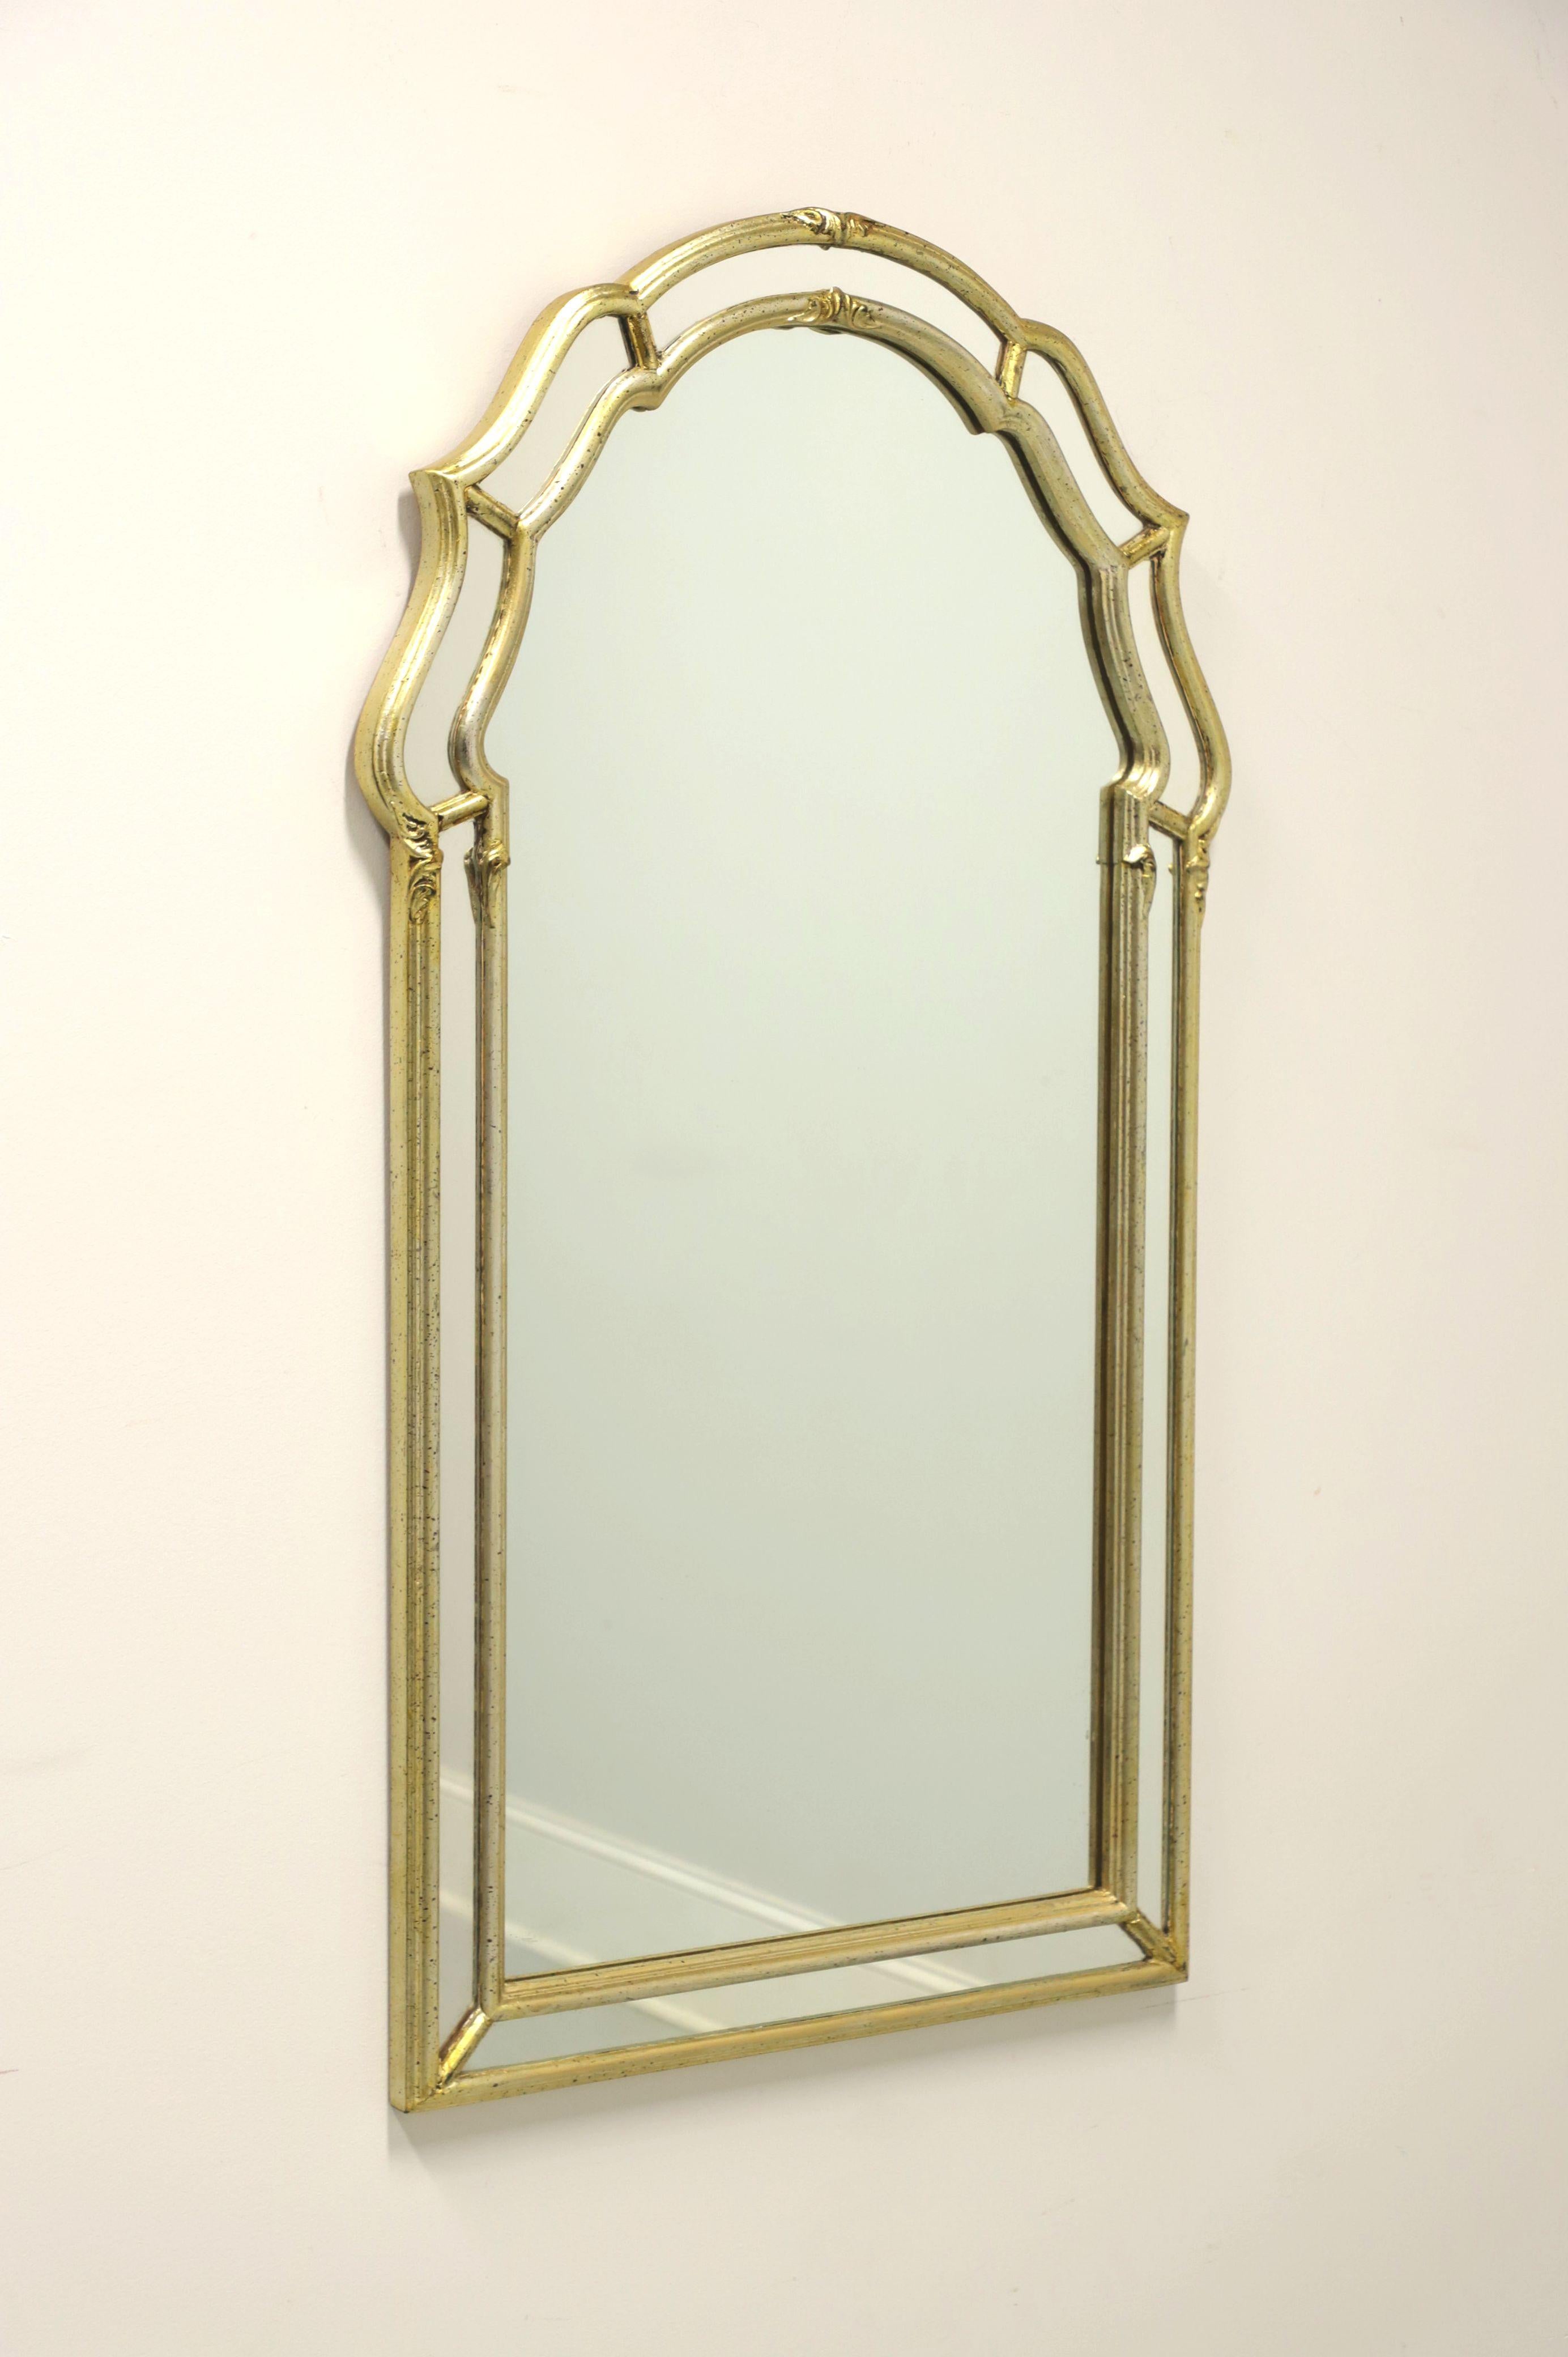 LABARGE Mid 20th Century Italian Regency Style Parclose Wall Mirror For Sale 5